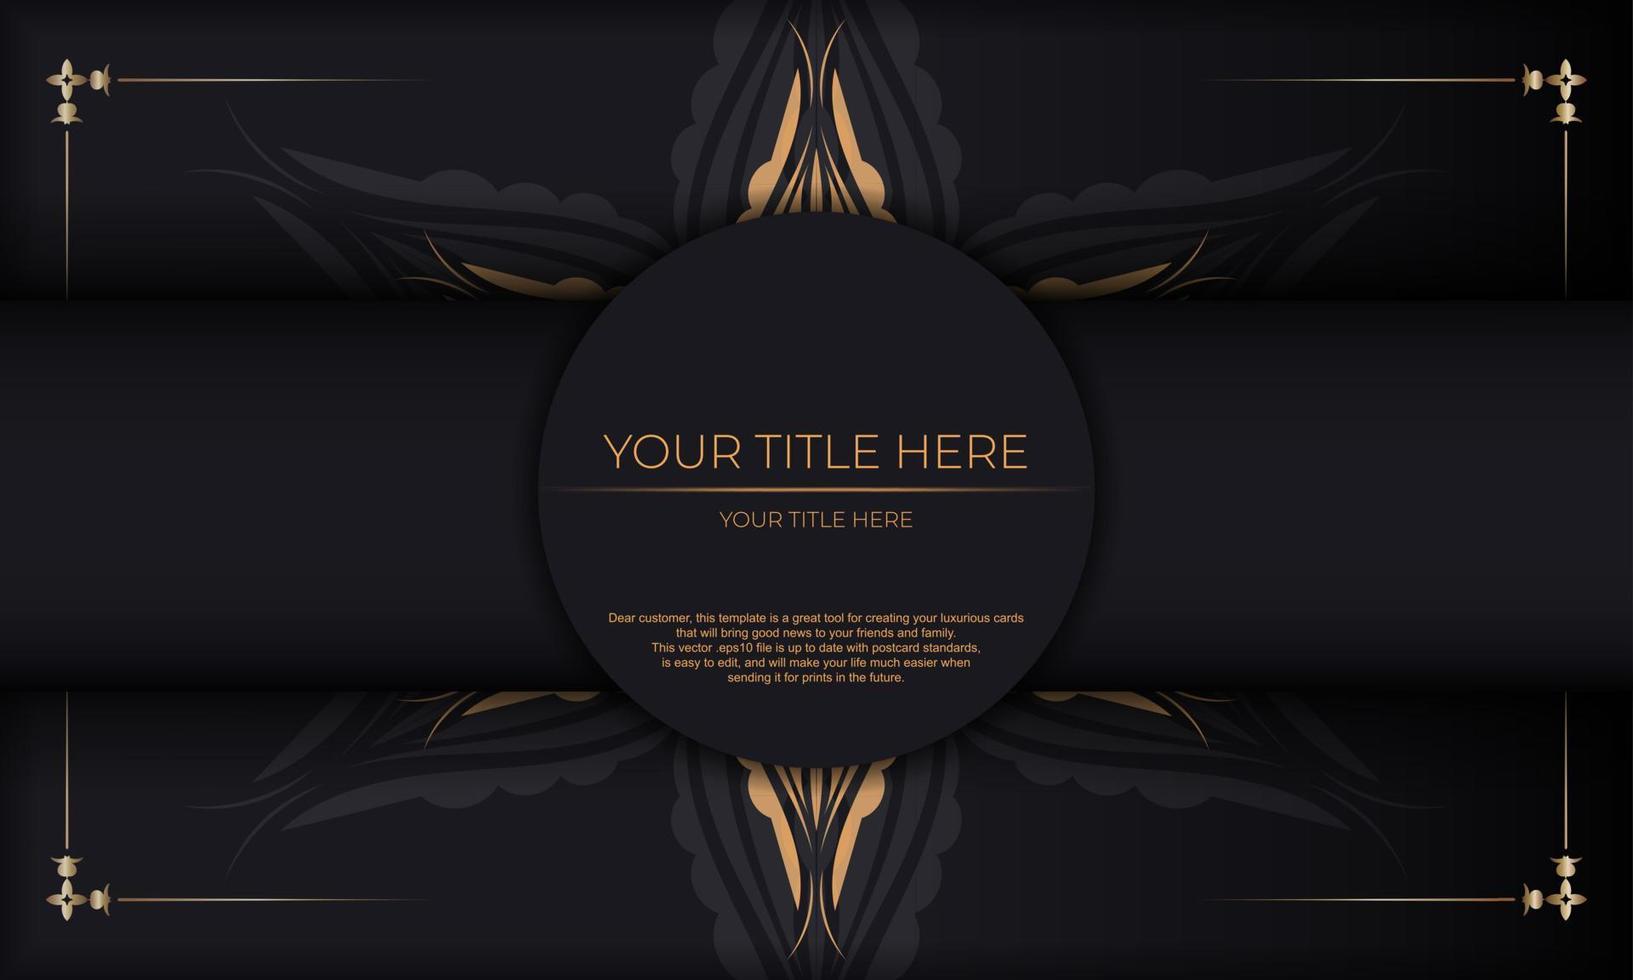 Luxurious black postcard template with vintage indian ornaments. Elegant and classic elements ready for print and typography. Vector illustration.